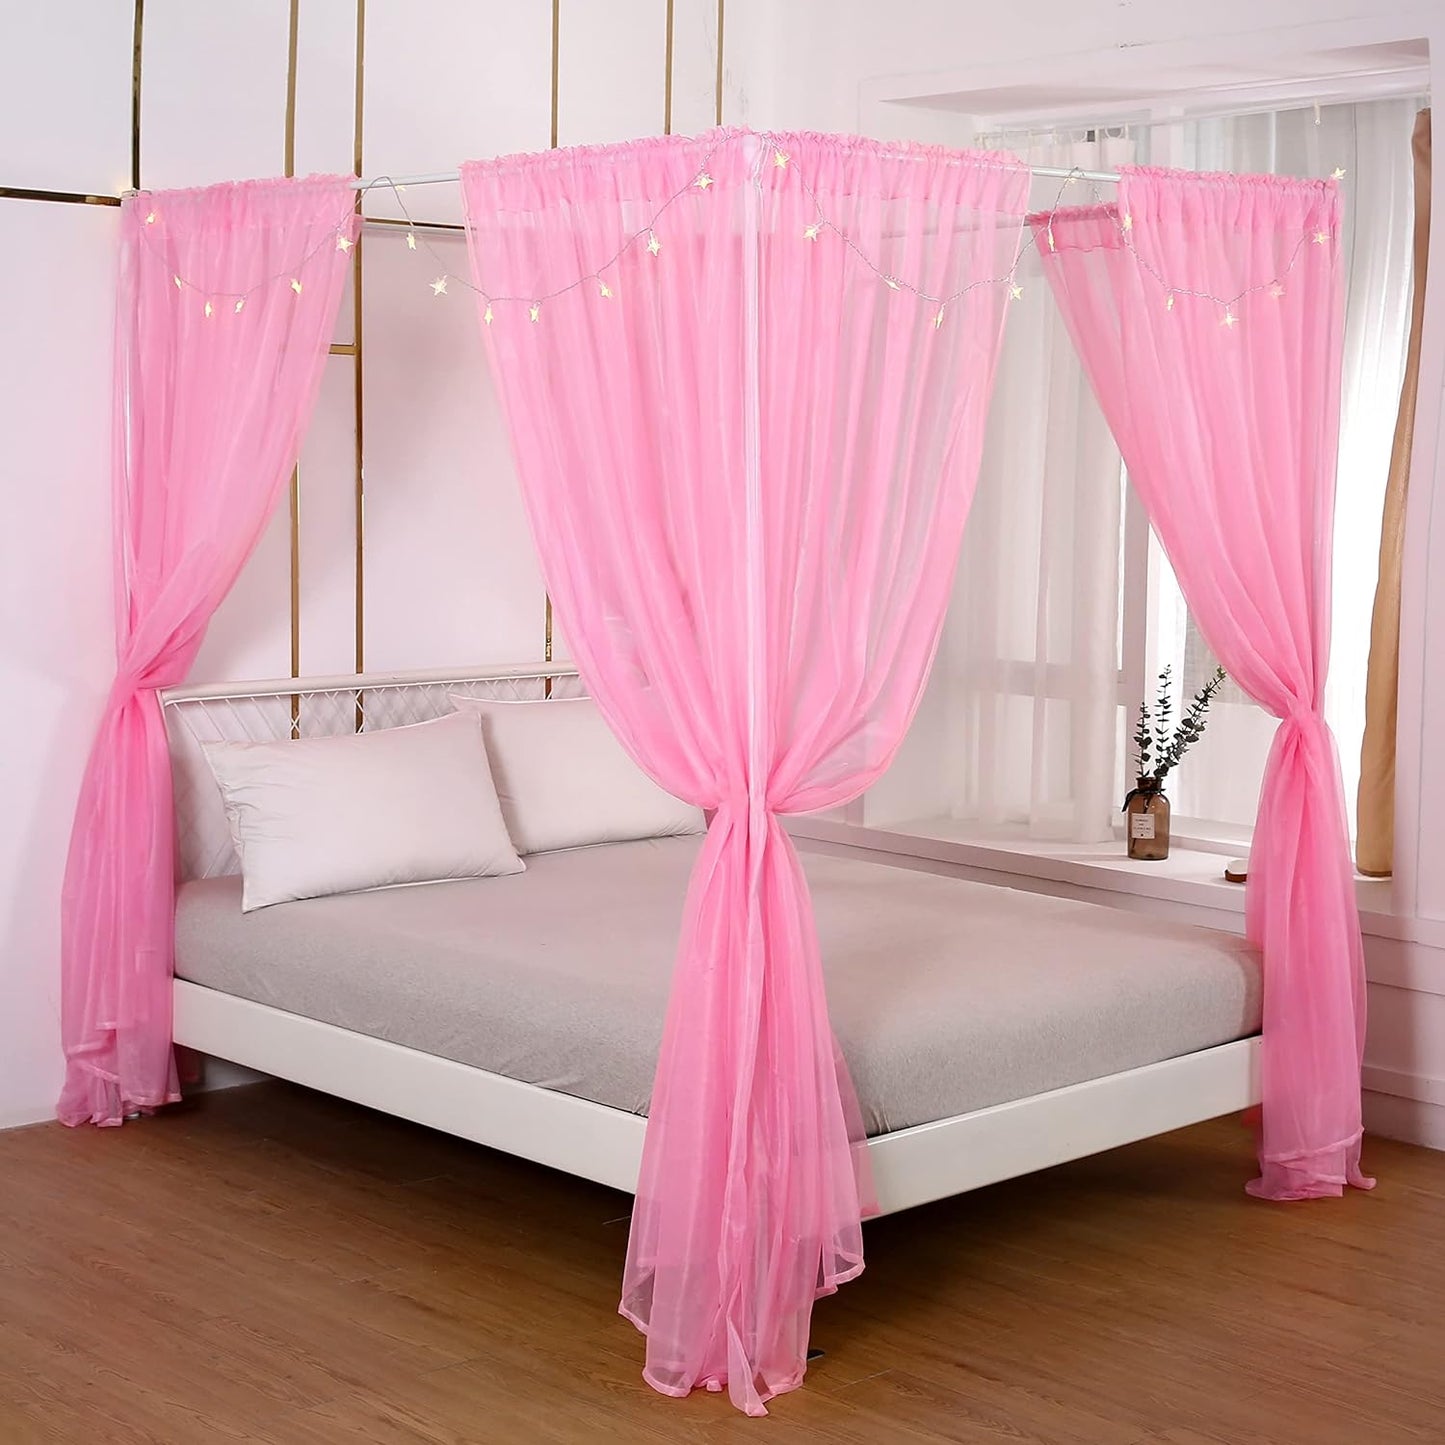 Akiky Princess Canopy Bed Curtains Bed Canopy Curtains with Lights for Queen Size Bed Drapes,8 Panels Canopies with 2 Lights,Room Décor (Full/Queen, White)  Akiky Pink King 